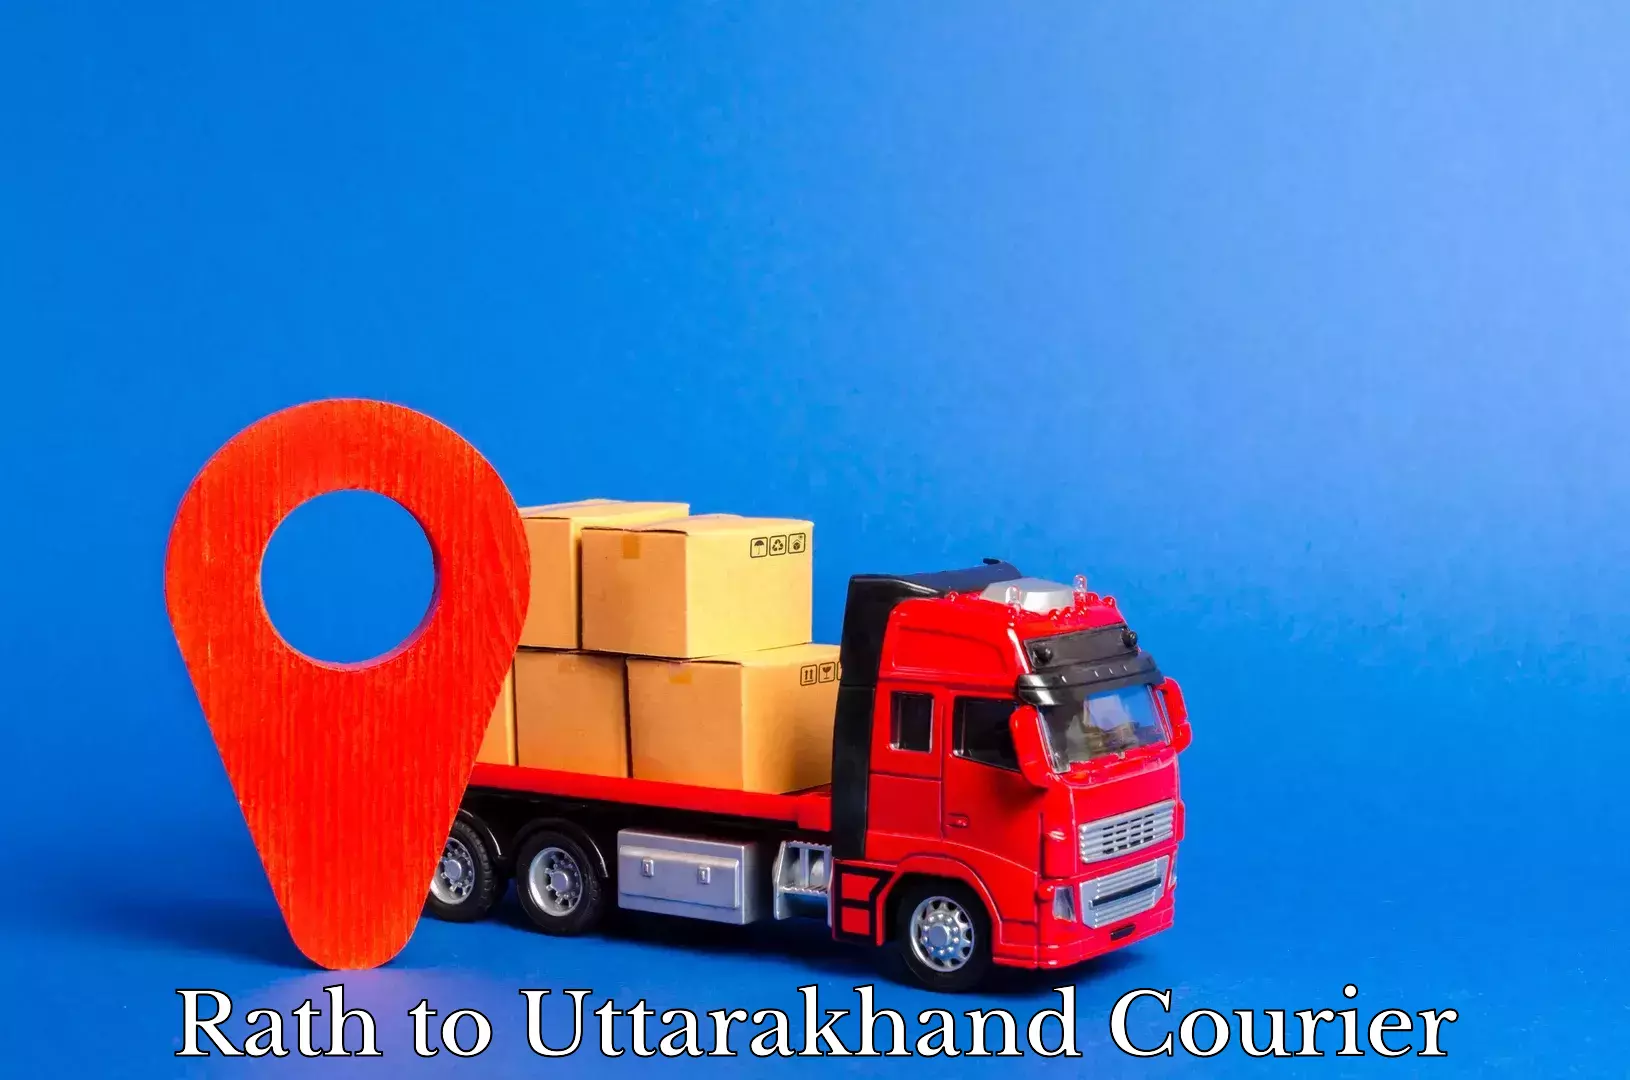 Nationwide courier service Rath to Uttarakhand